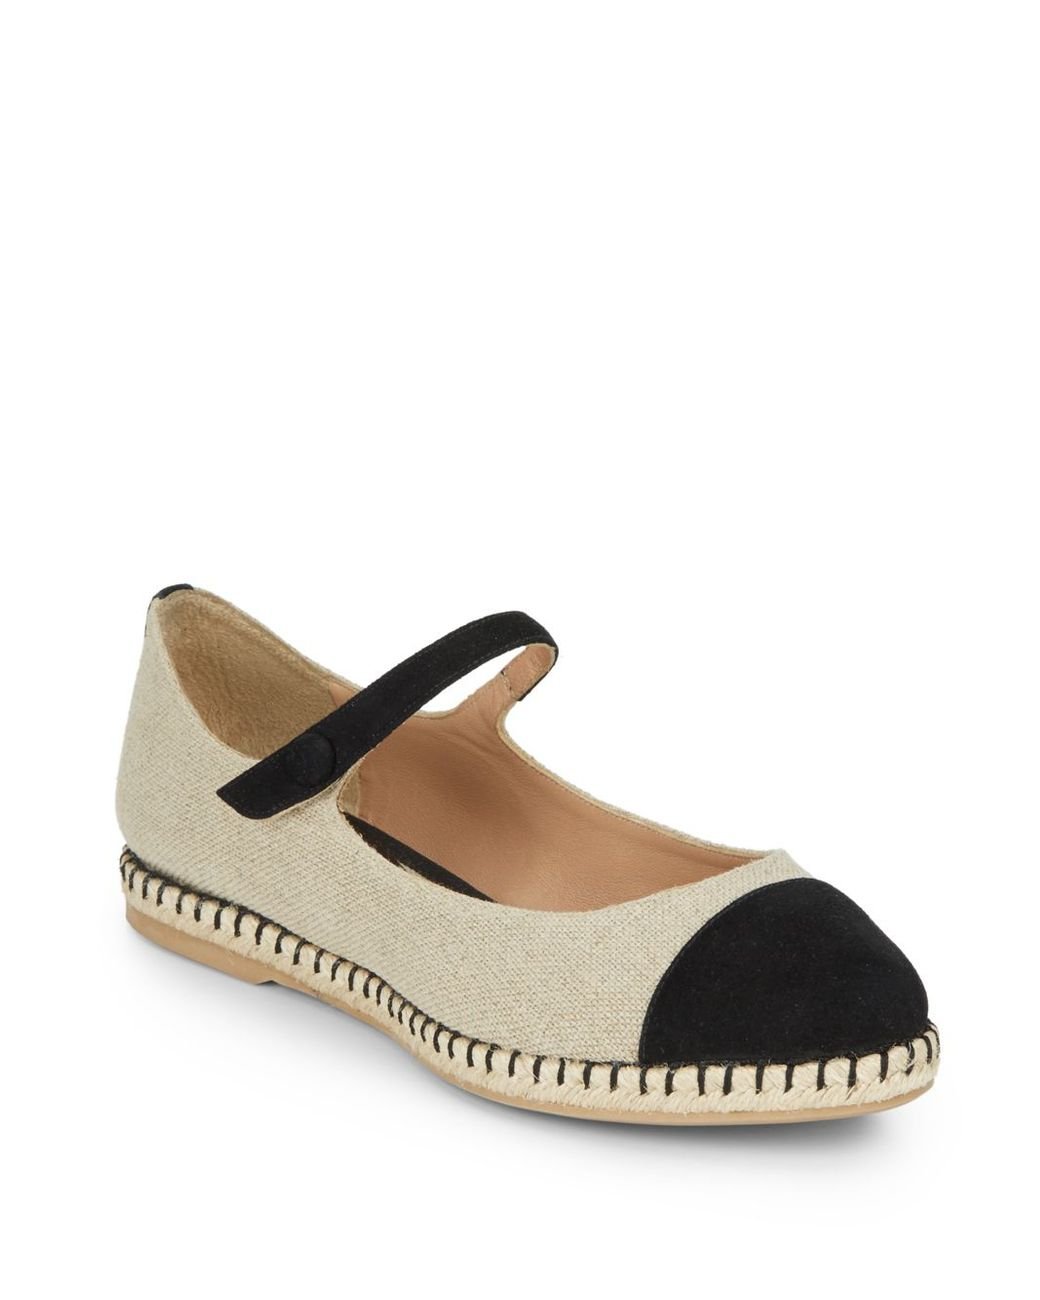 Tabitha Simmons Neely Mary Jane Espadrilles in Natural | Lyst